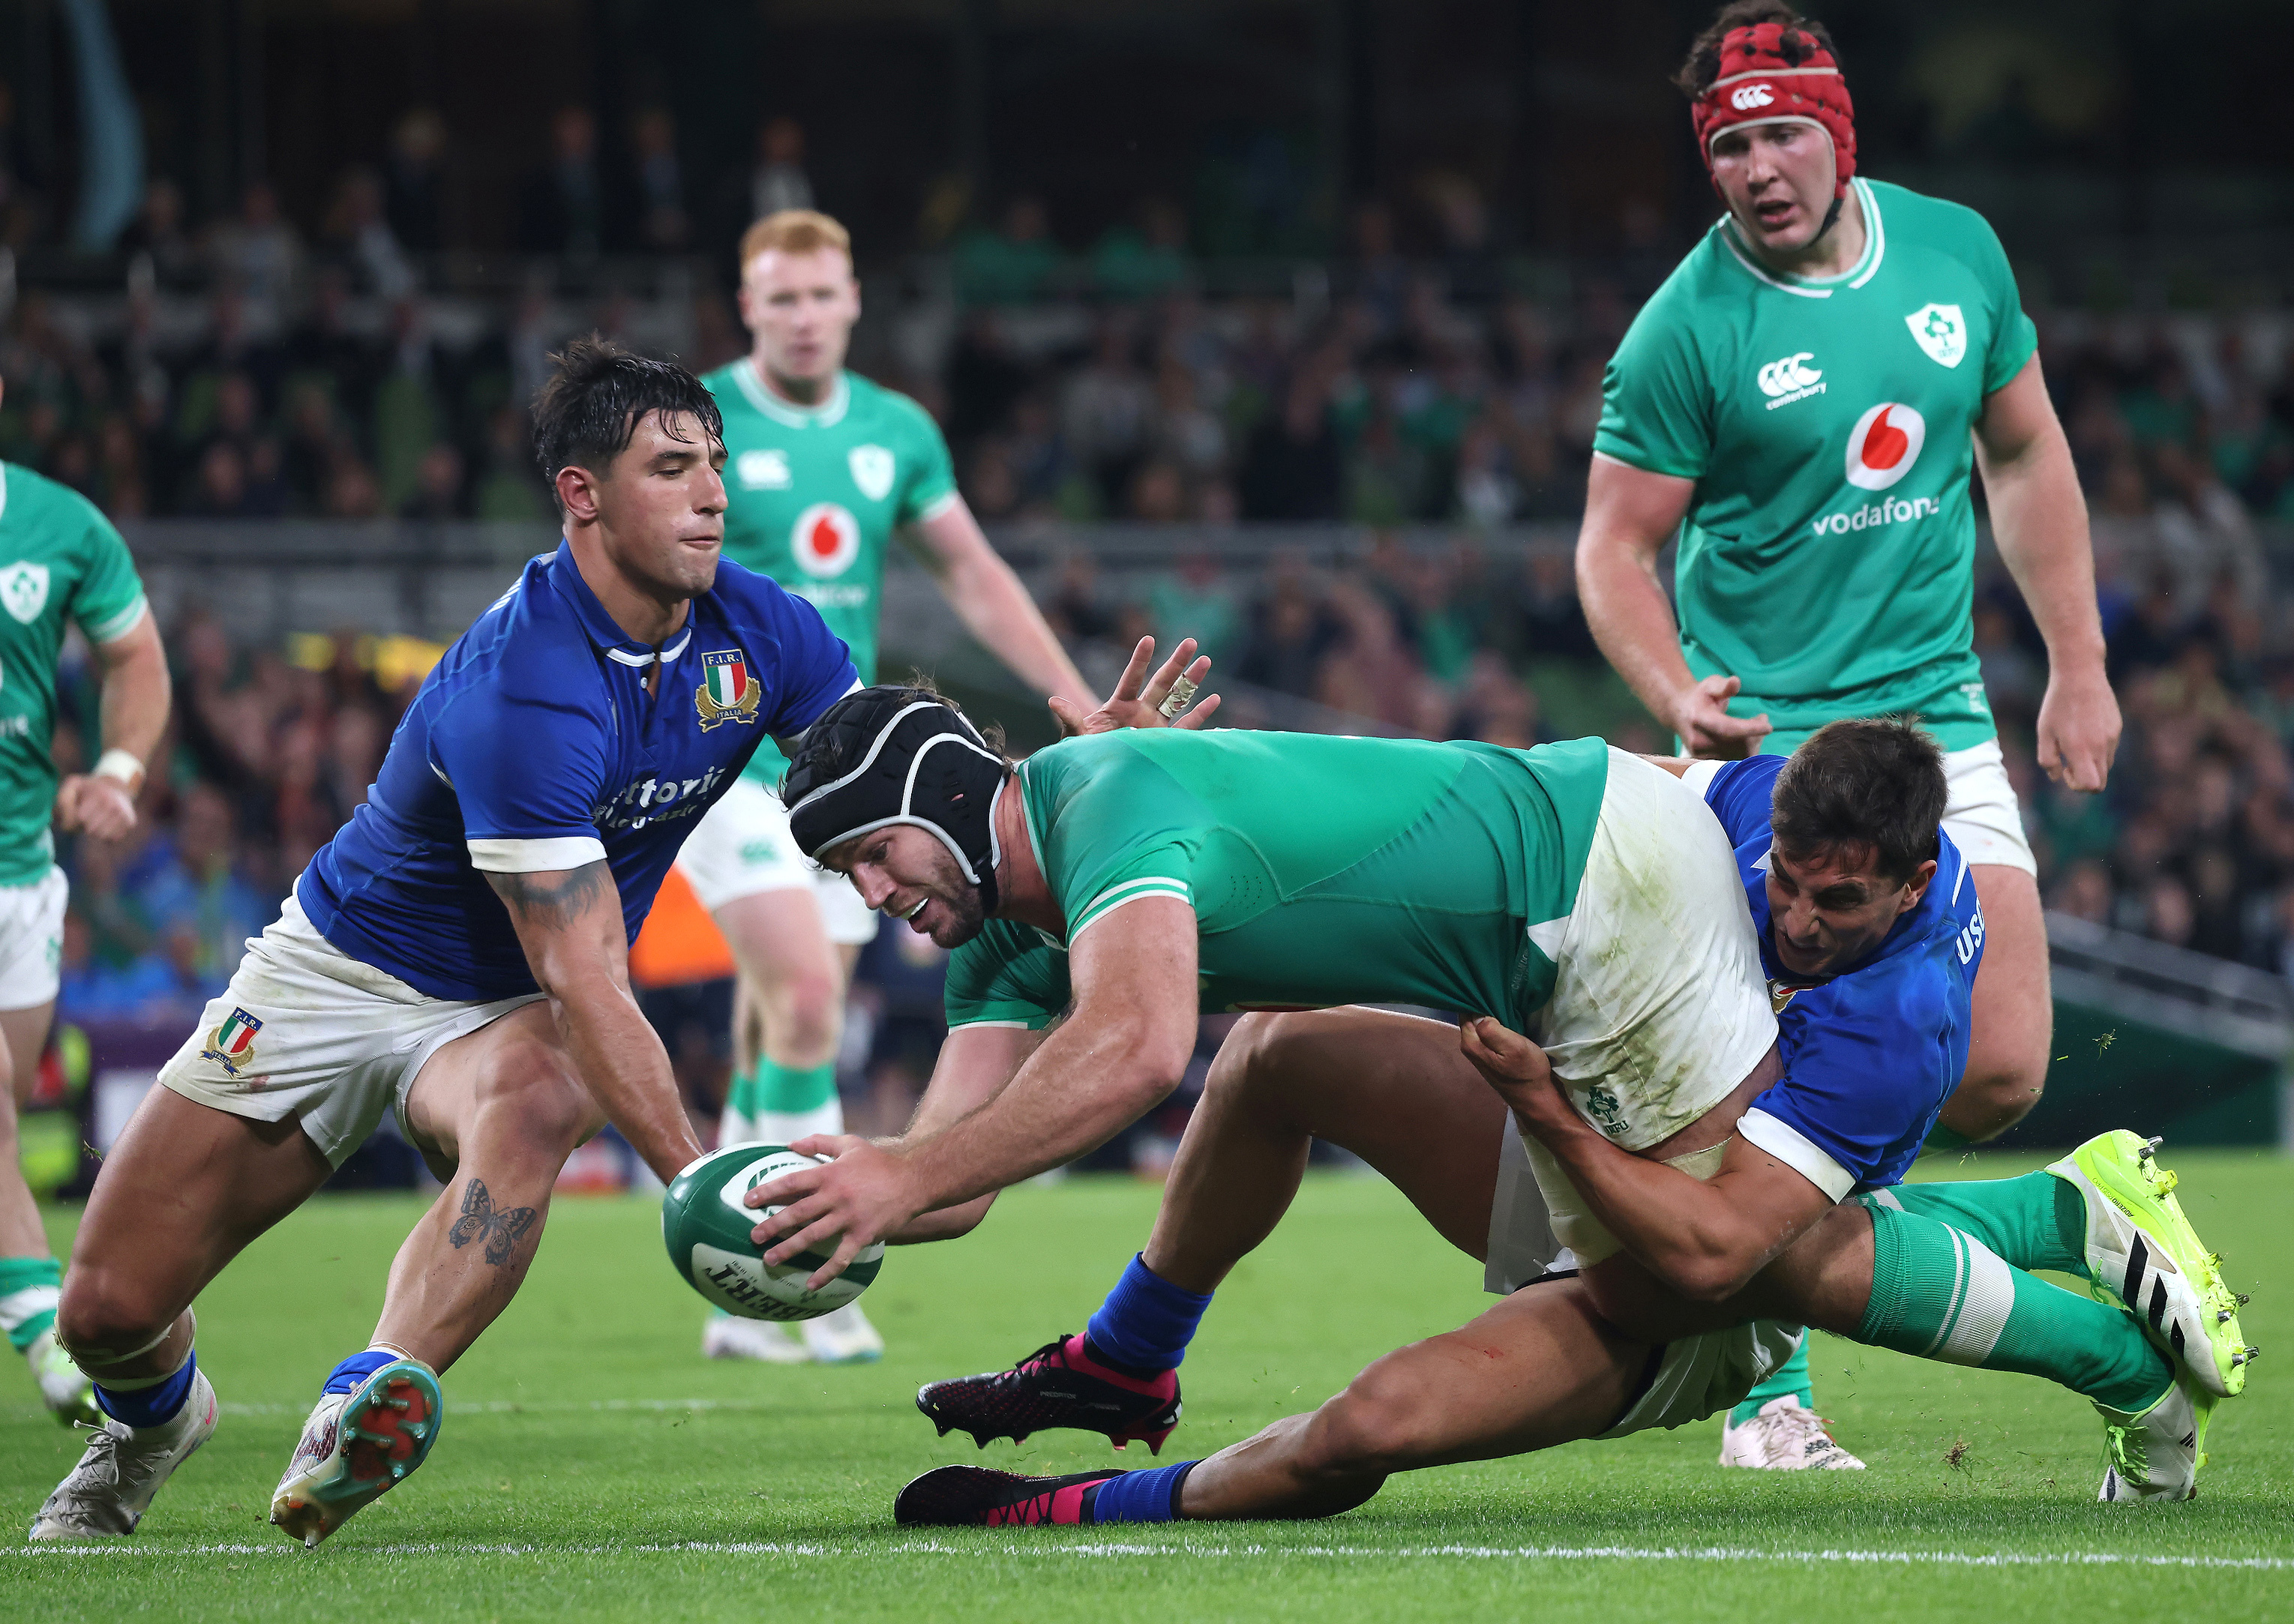 Caelan Doris scored two tries in Ireland's World Cup warm-up win over Italy